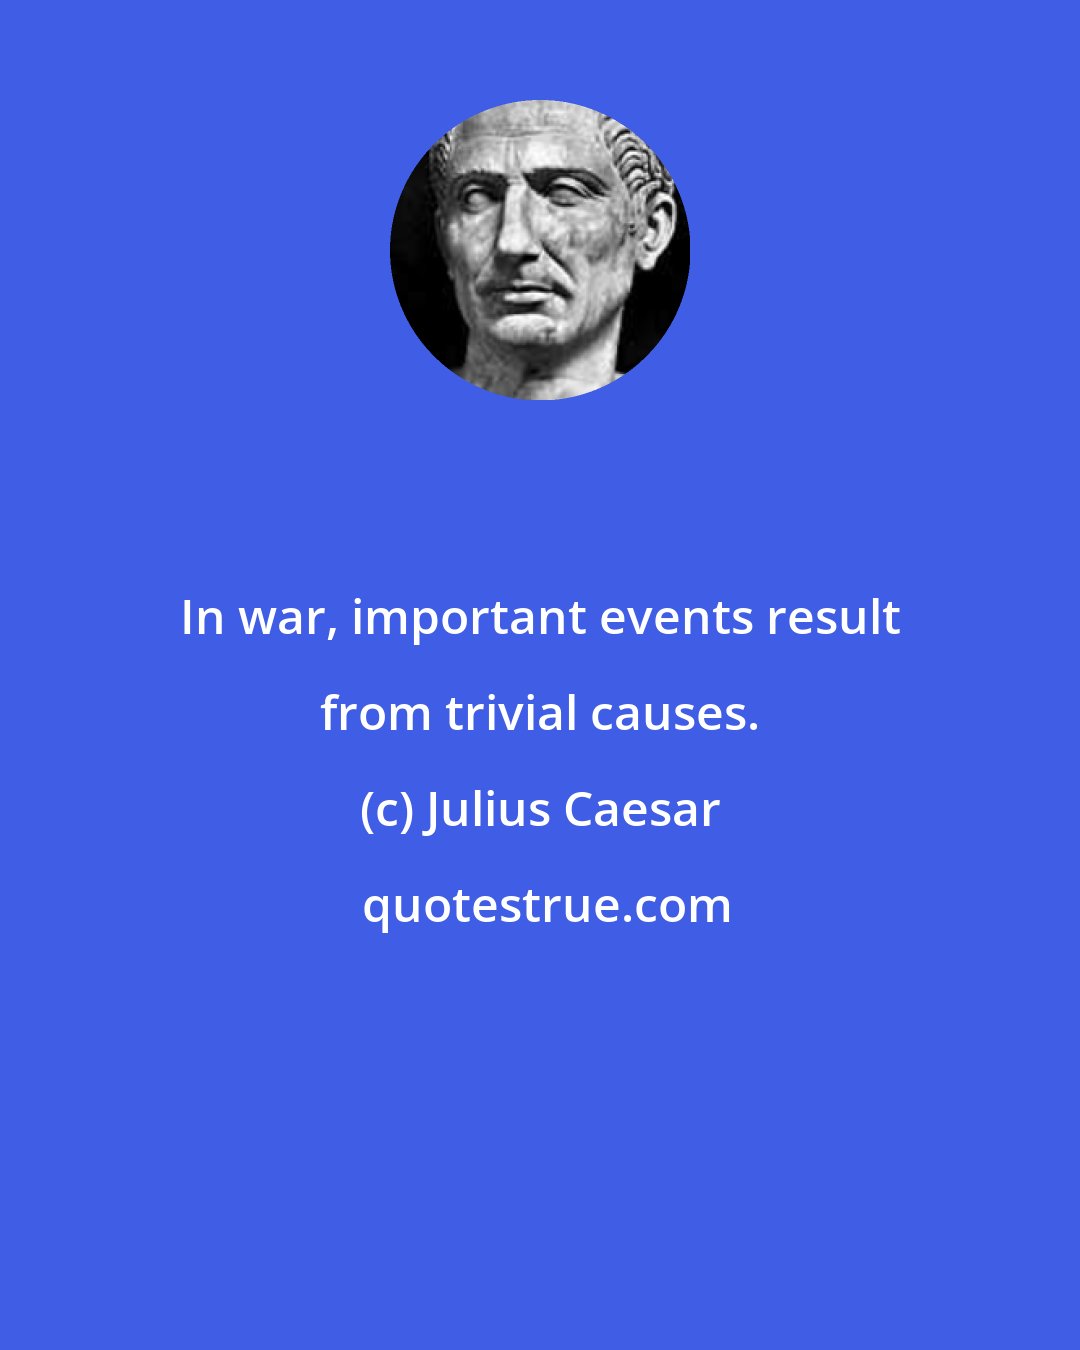 Julius Caesar: In war, important events result from trivial causes.